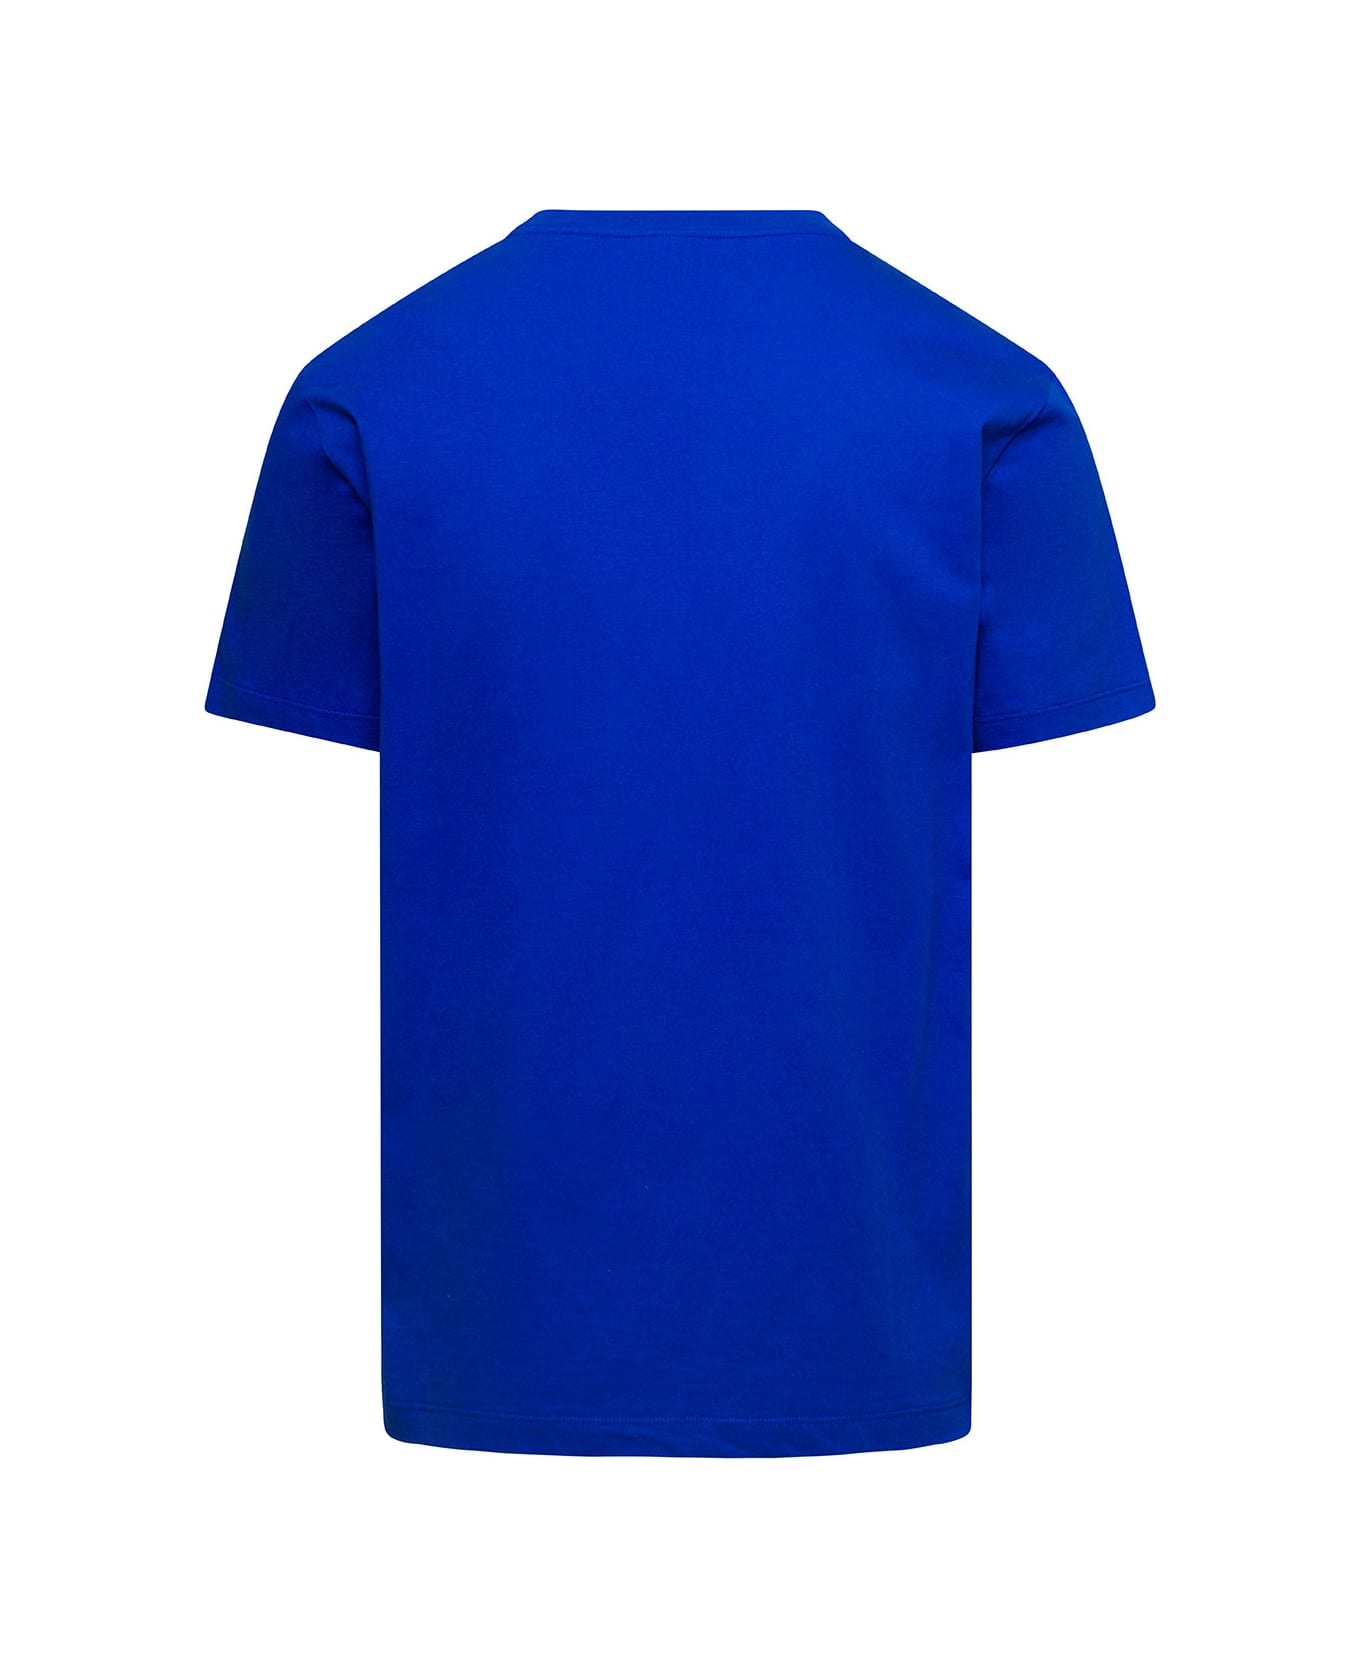 Versace Blue T-shirt With Masque Print On The Front In Cotton Man - Blu